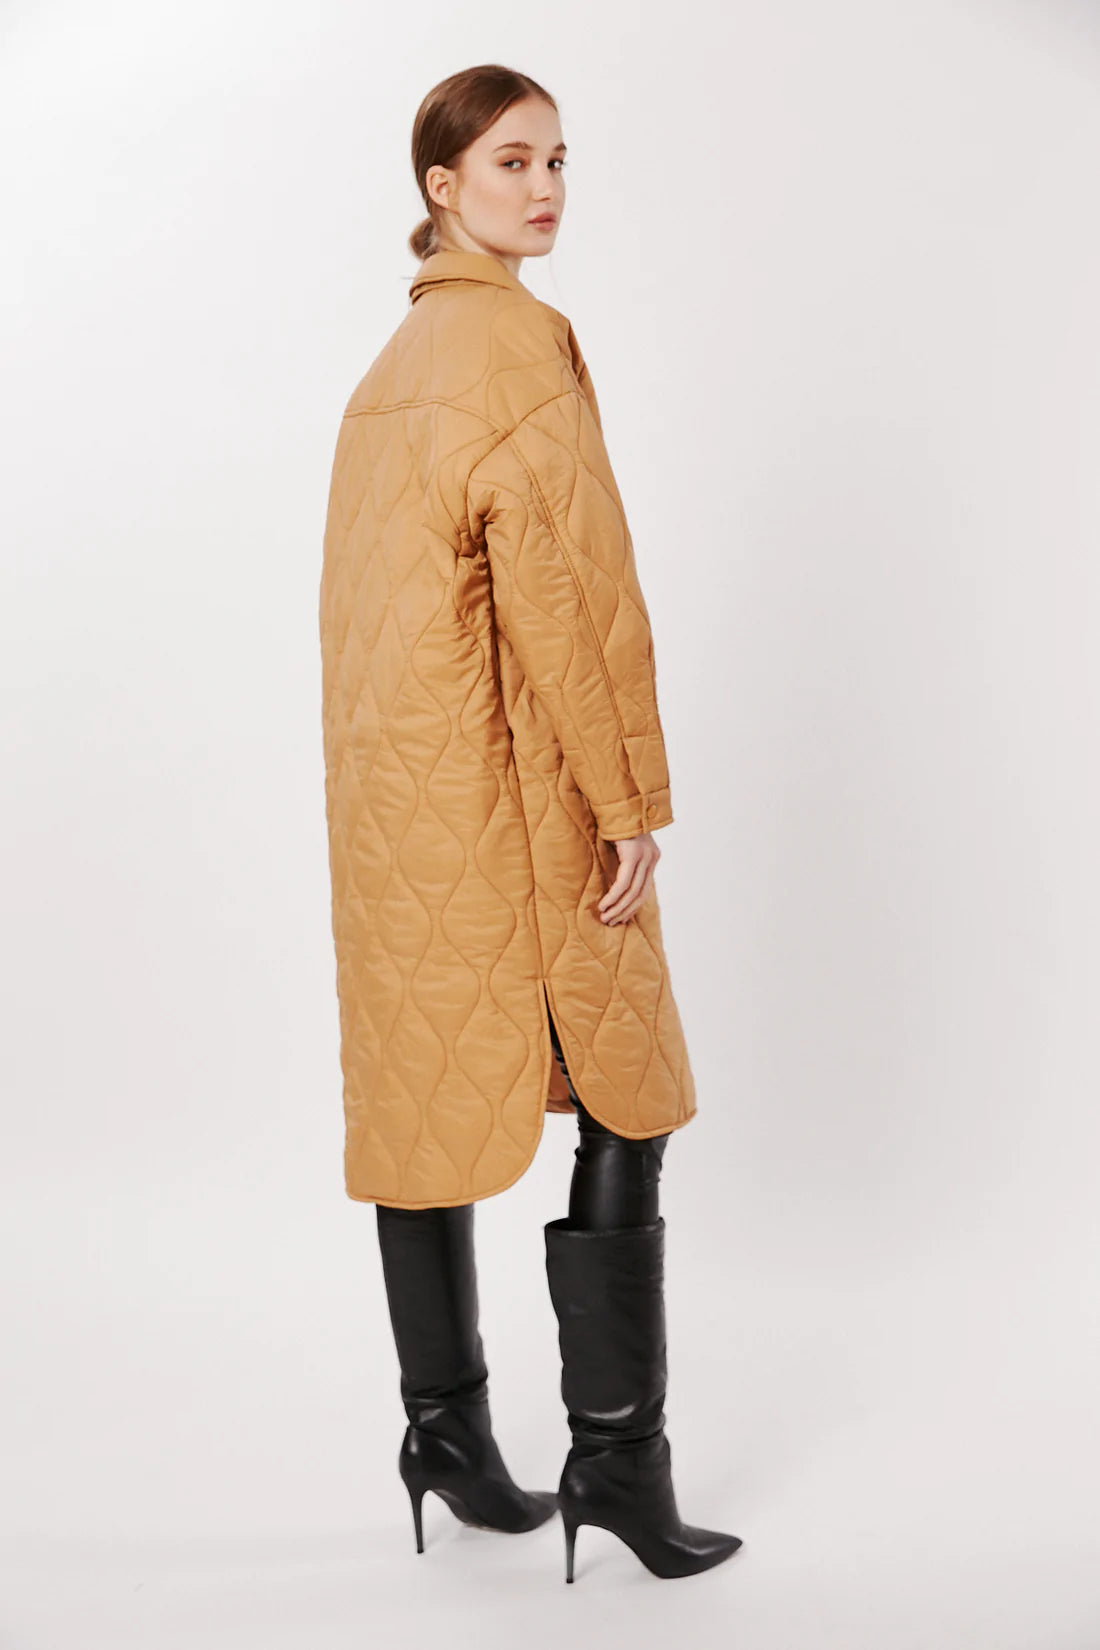 Deluc Fenicia Tan Quilted Long Shacket